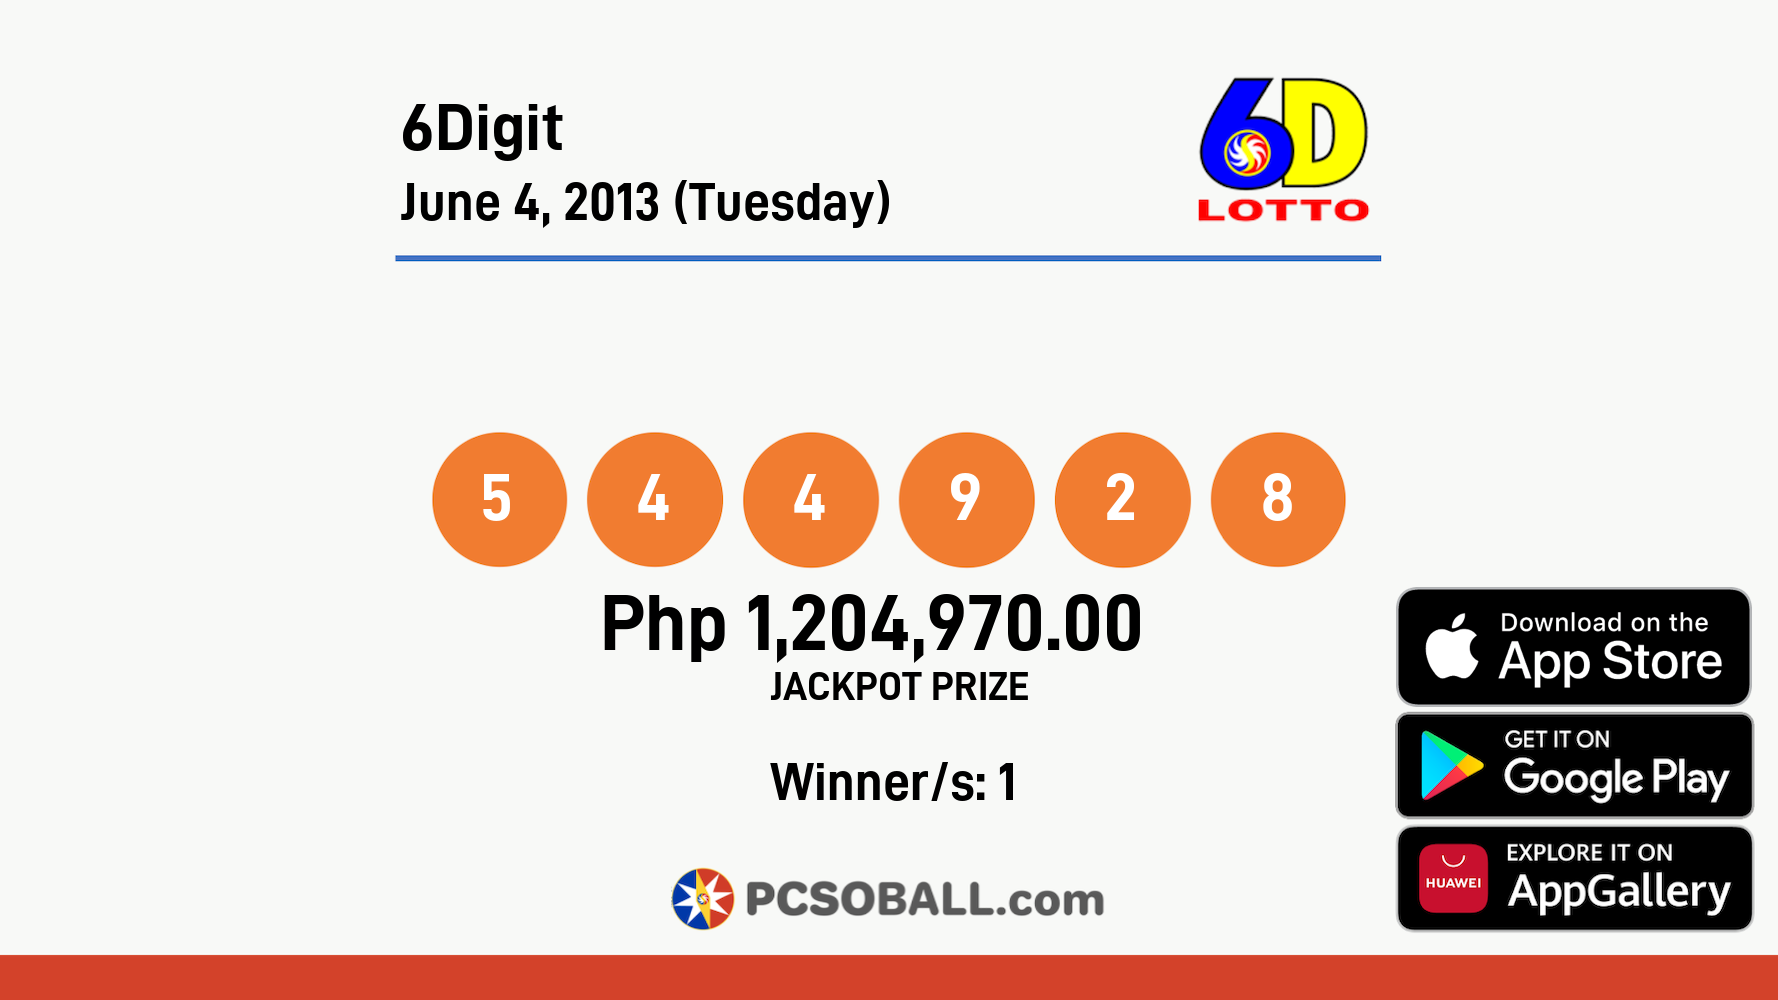 6Digit June 4, 2013 (Tuesday) Result